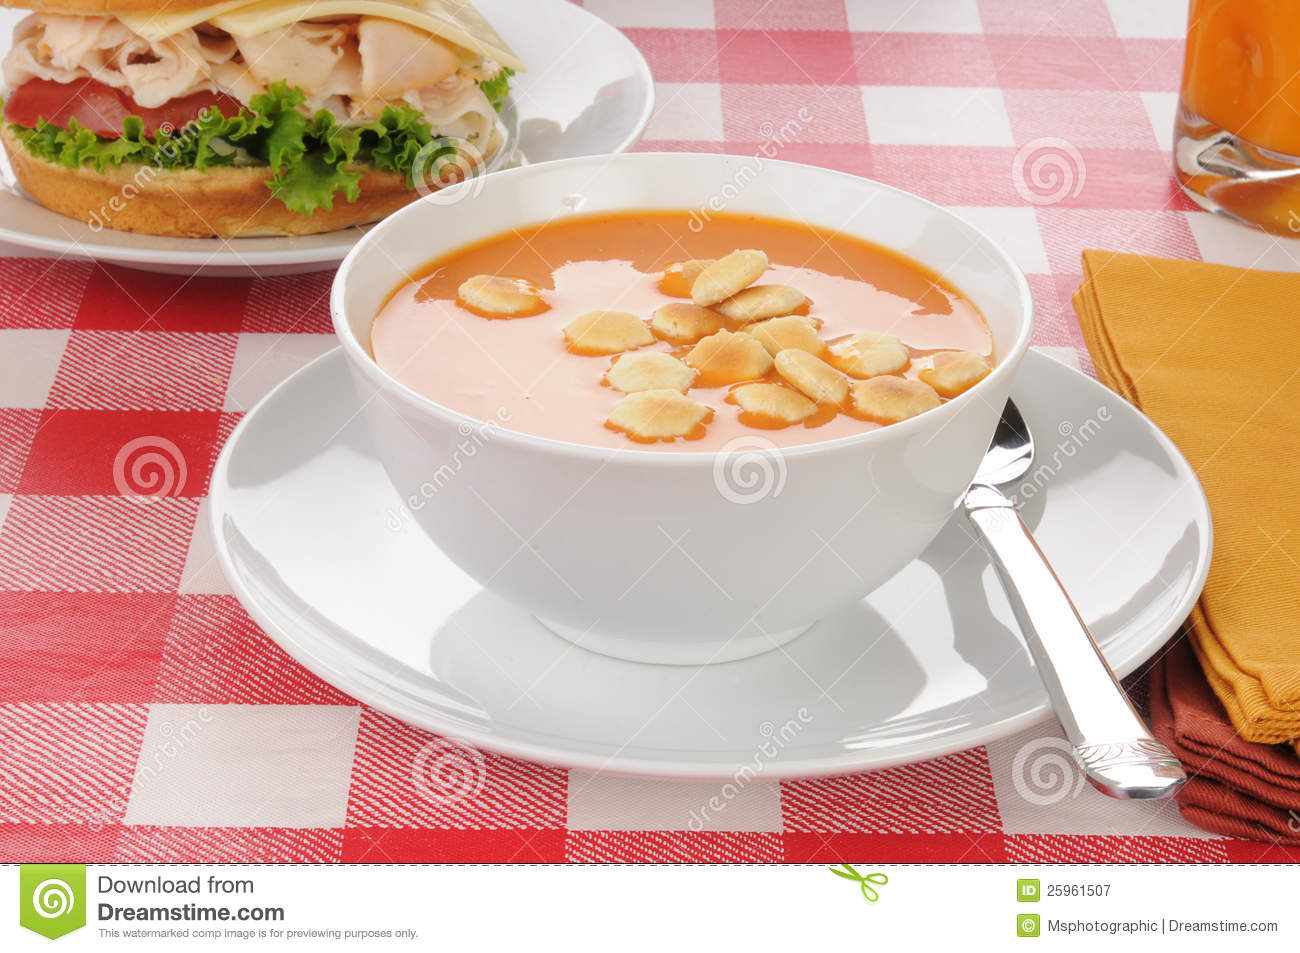 Tomato Soup With Oyster Crackers Royalty Free Stock Photography